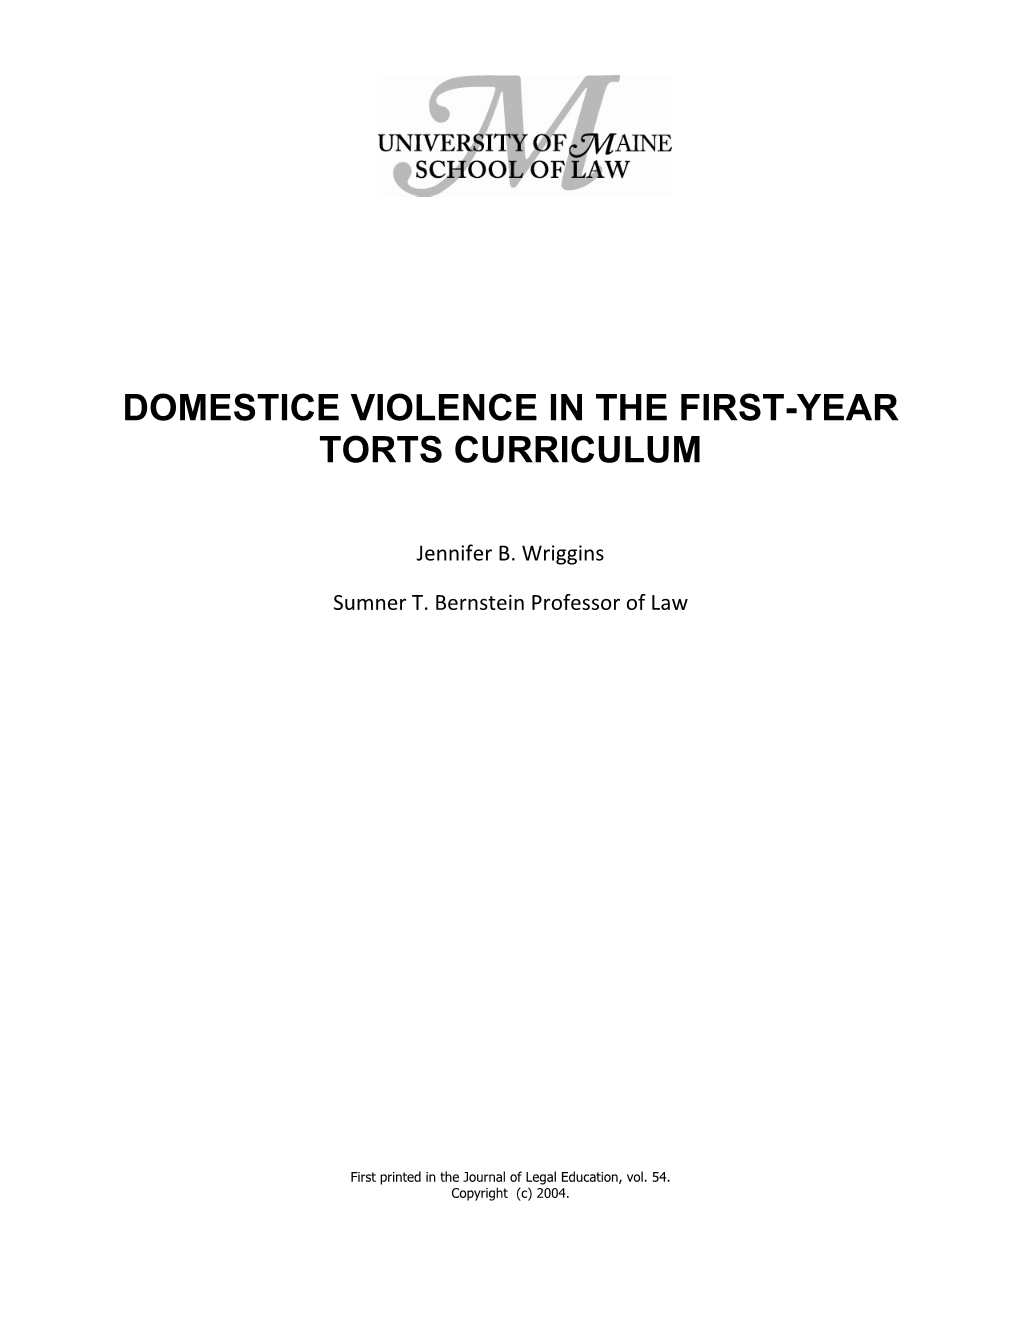 Domestice Violence in the First-Year Torts Curriculum